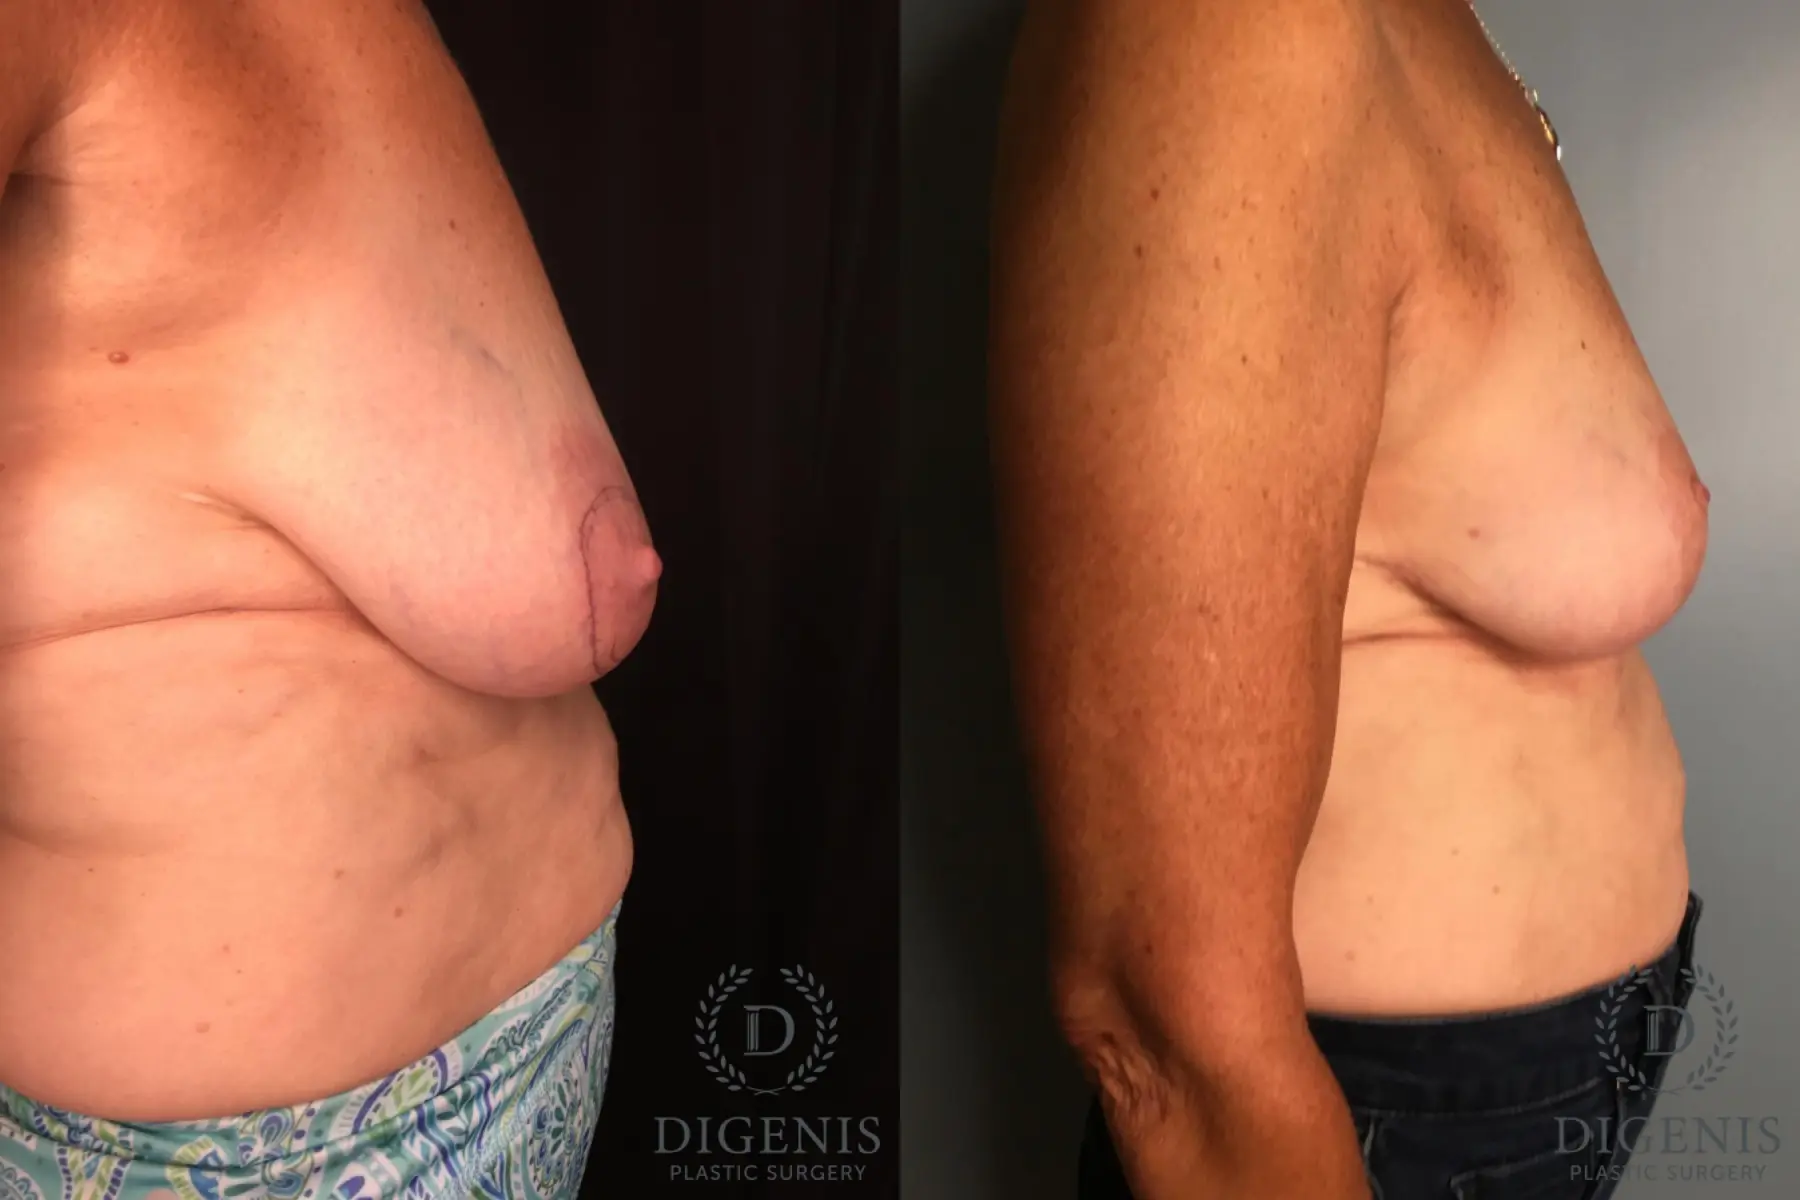 Mastopexy: Patient 1 - Before and After 3